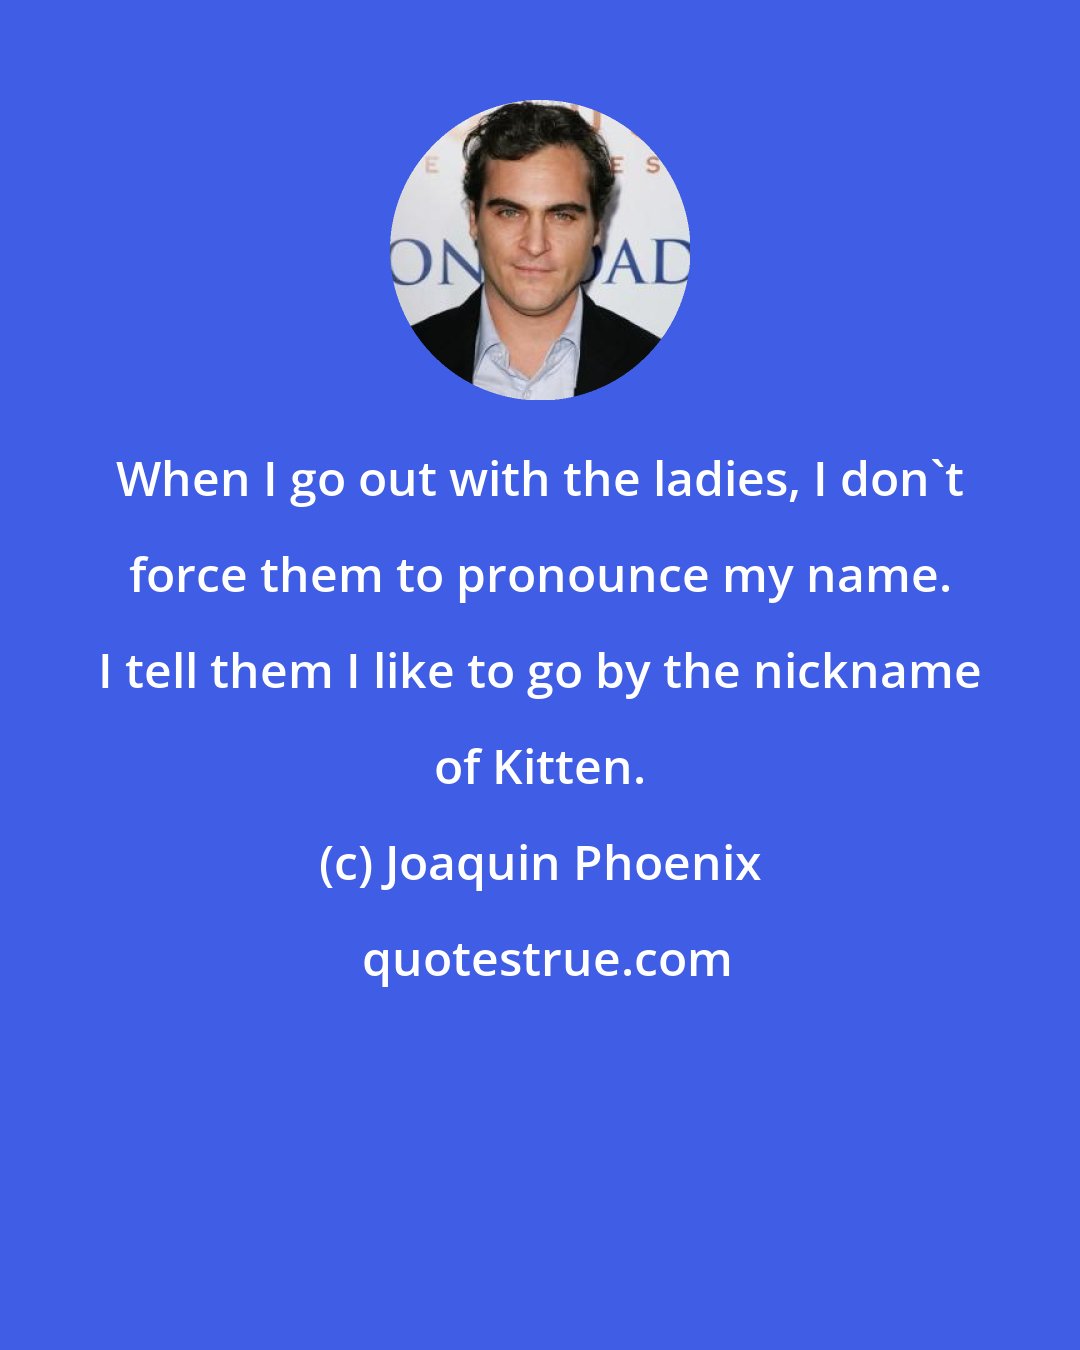 Joaquin Phoenix: When I go out with the ladies, I don't force them to pronounce my name. I tell them I like to go by the nickname of Kitten.